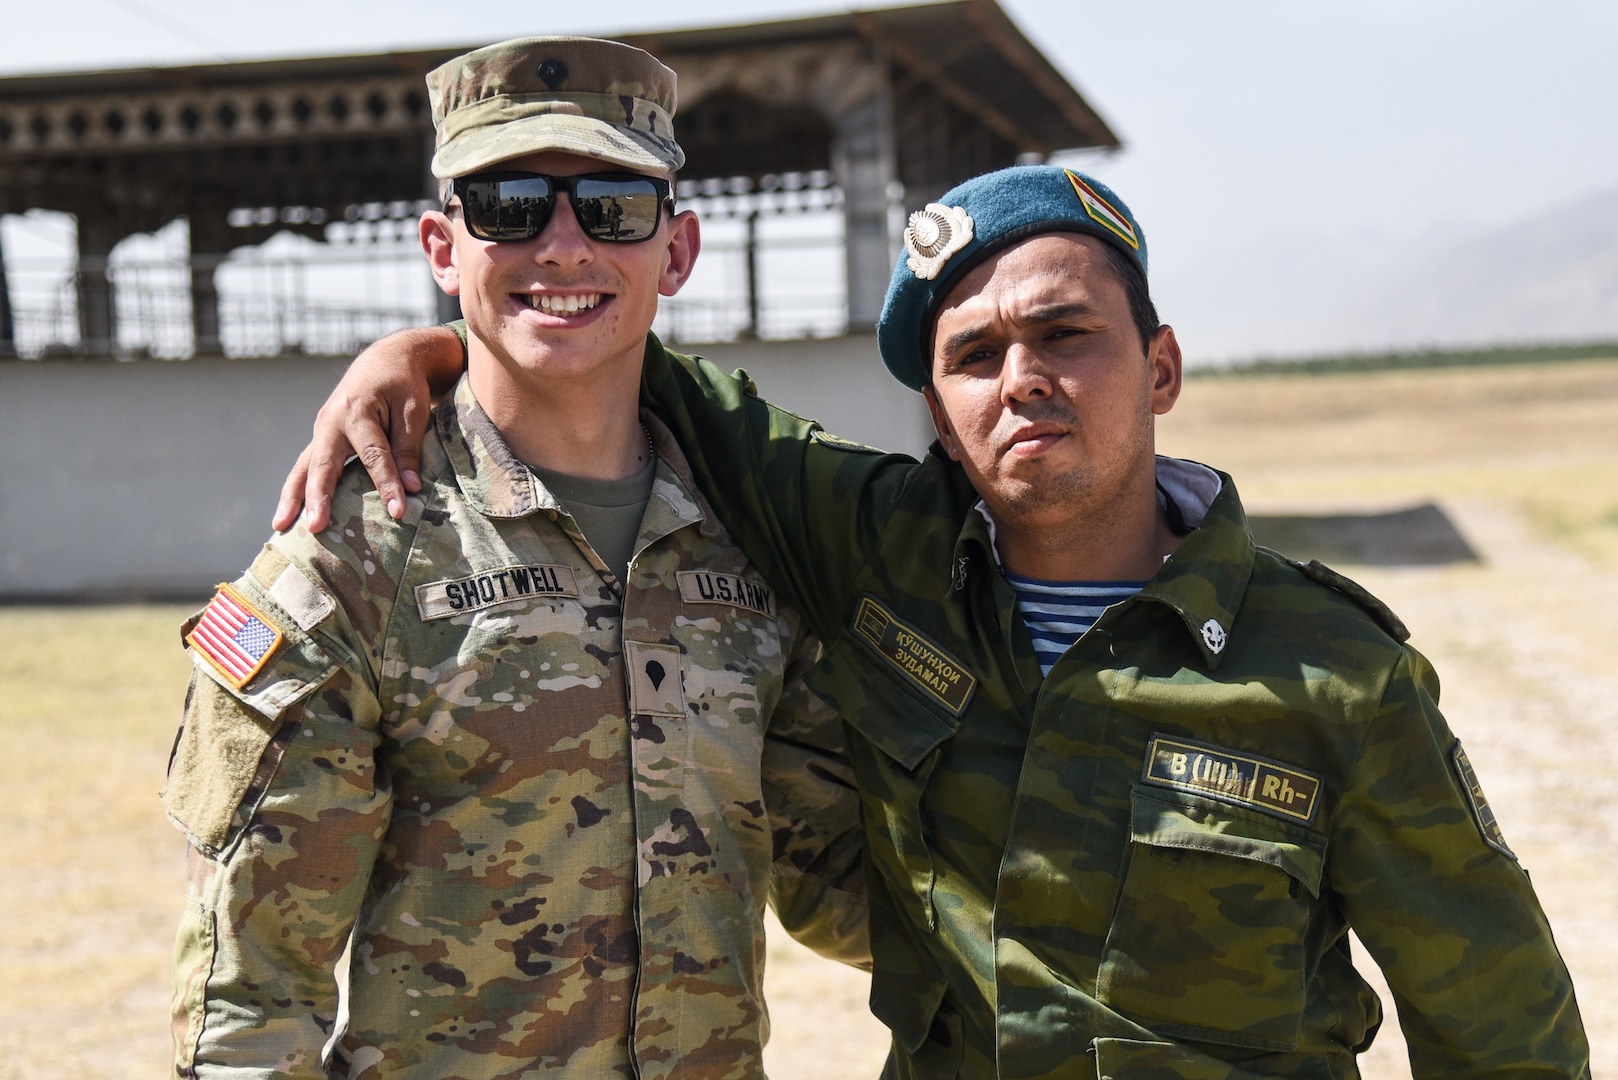 U.S. National Guard Soldiers pose alongside their partners from the Tajikistan Ministry of Defense during the exercise “Regional Cooperation 22” Aug. 14, 2022, at a training site near Dushanbe, Tajikistan. RC 22 is an annual, multi-national U.S. Central Command-sponsored exercise conducted by U.S. forces in partnership with Central and South Asia nations. (U.S. Army National Guard photo by Sgt. 1st Class Terra C. Gatti)